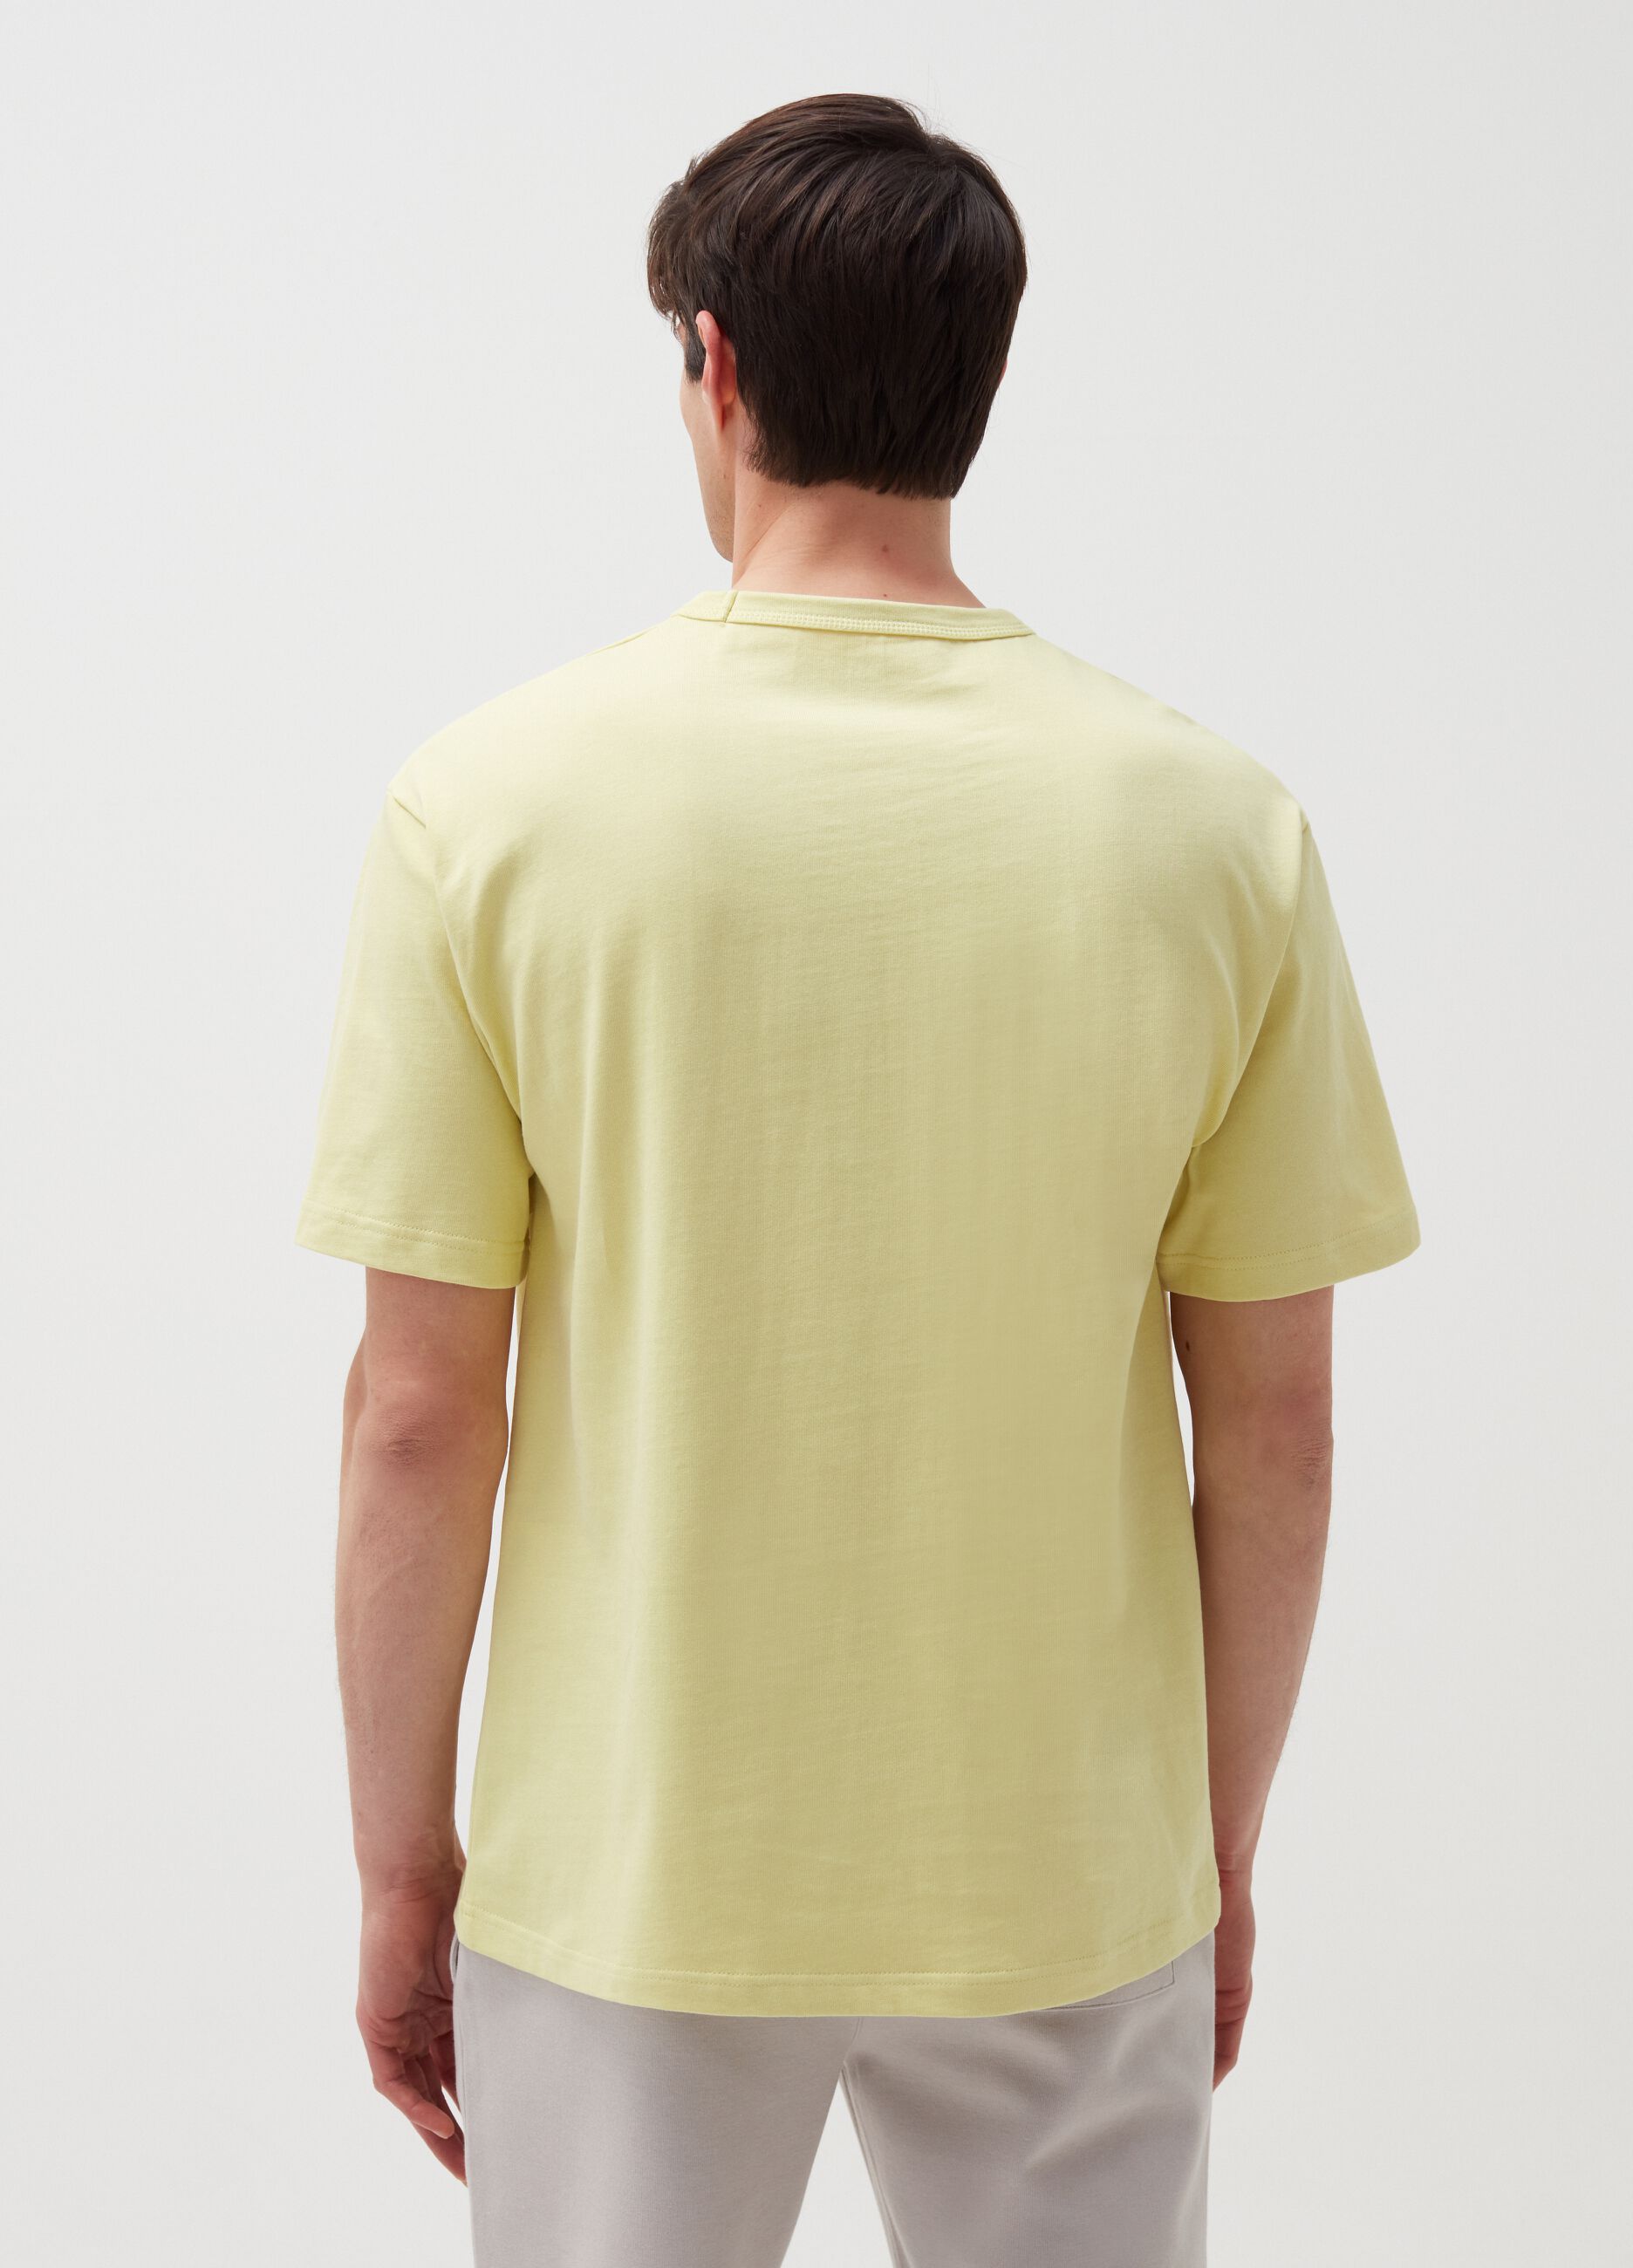 T-shirt boxy fit in cotone